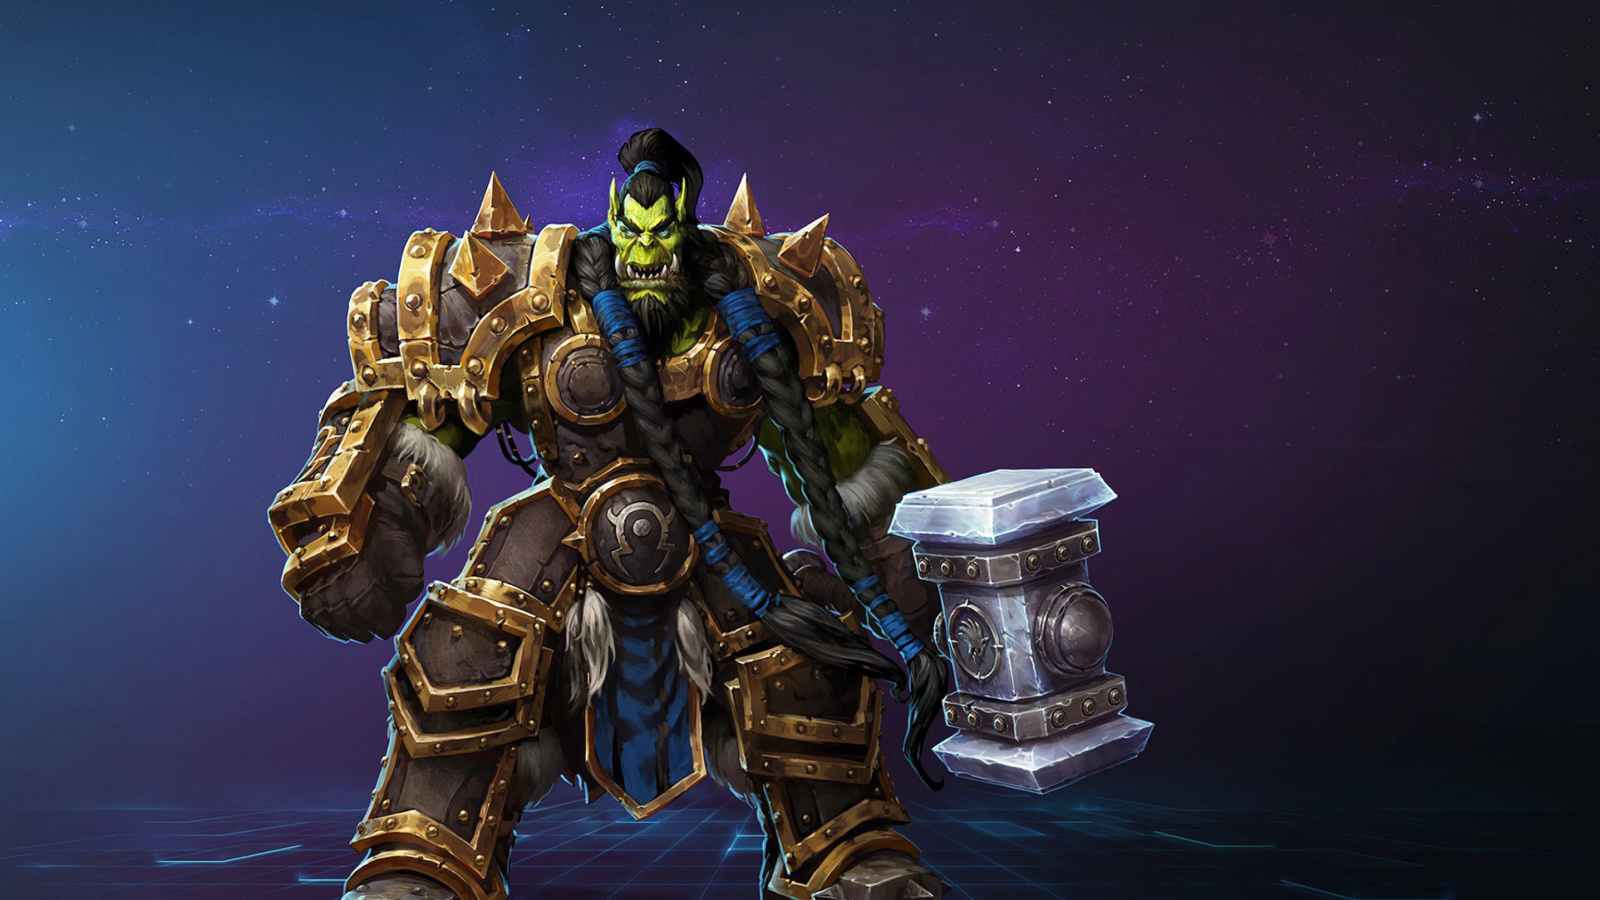 Heroes of the Storm multiplayer online battle arena video game screenshot #1 1600x900